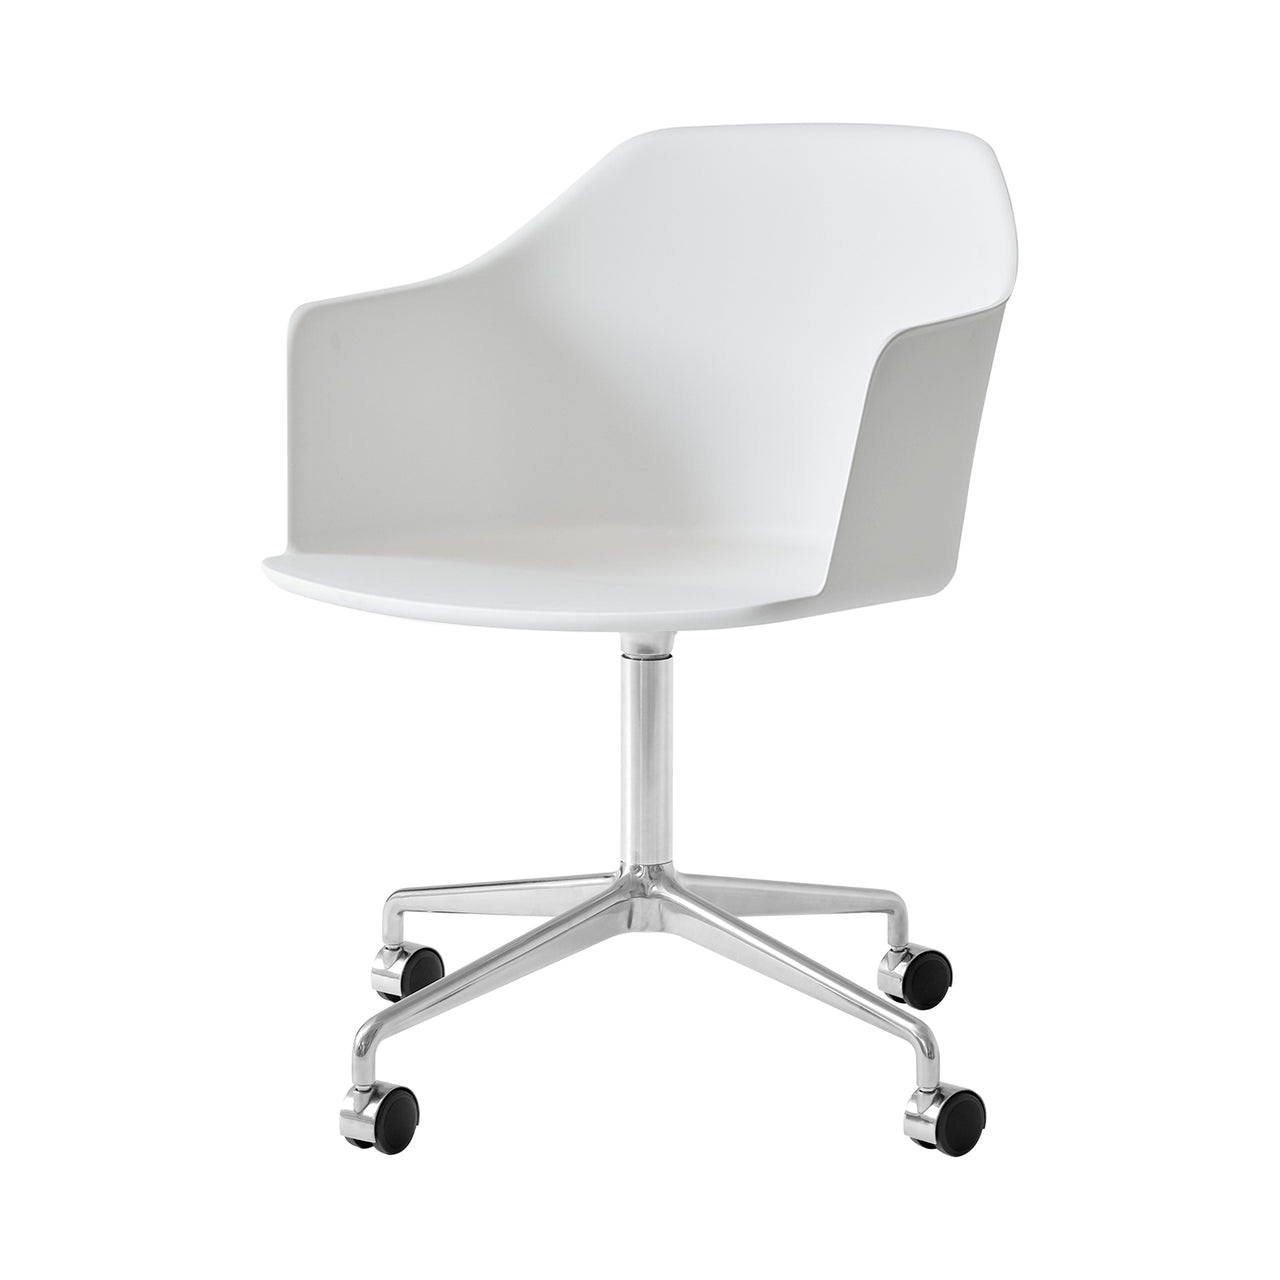 Rely Chair HW48: White + Polished Aluminum